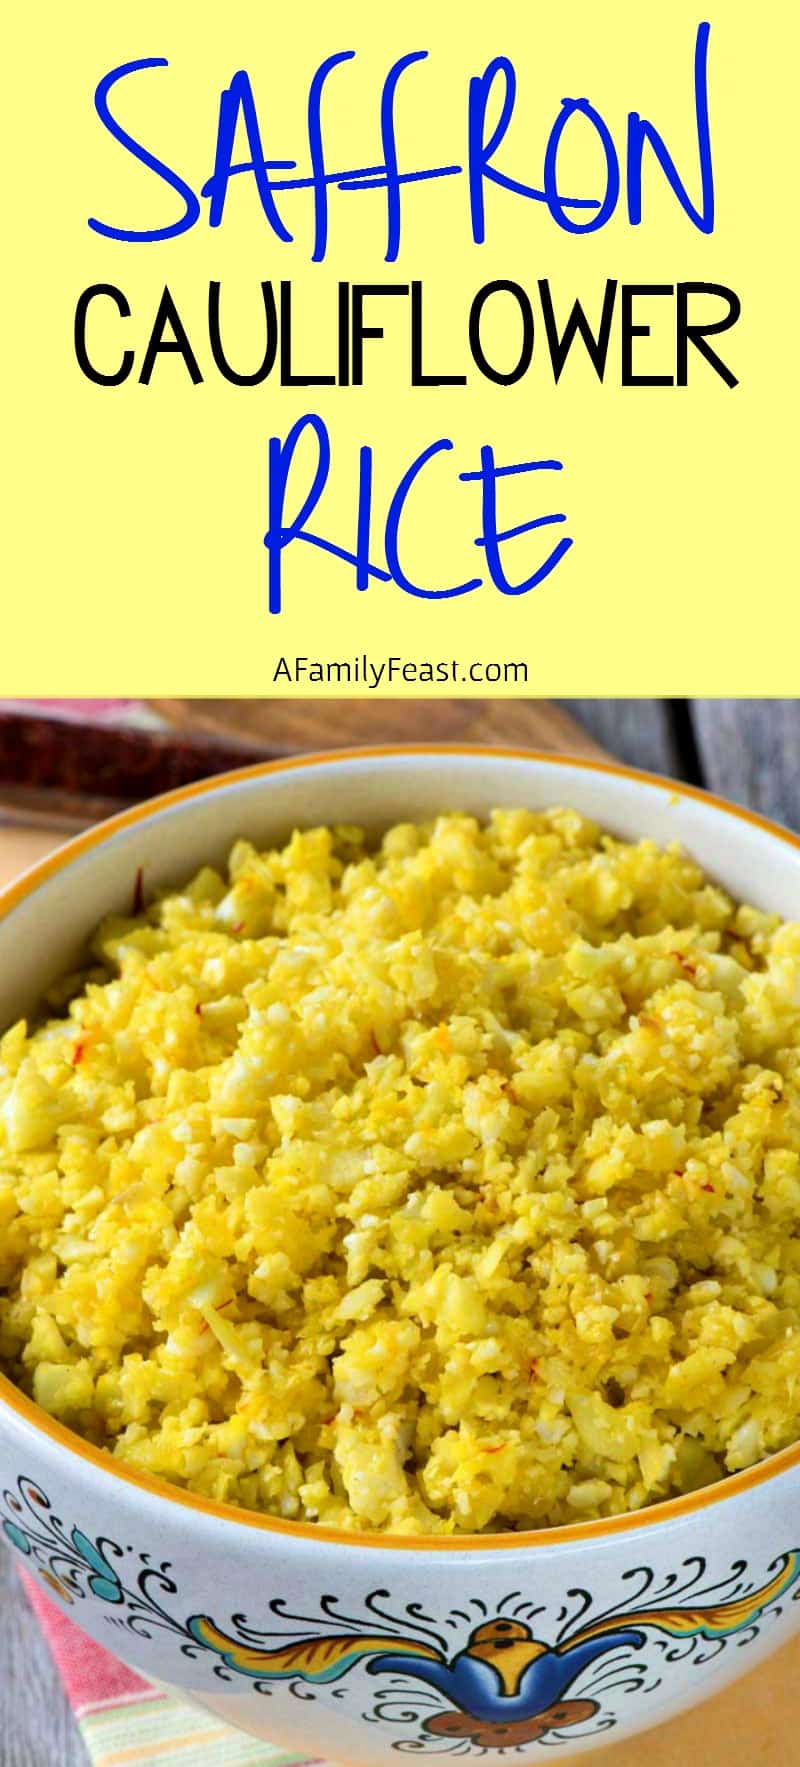 Saffron Cauliflower Rice is a low carb, grain free side dish that is easy to prepare and delicious!